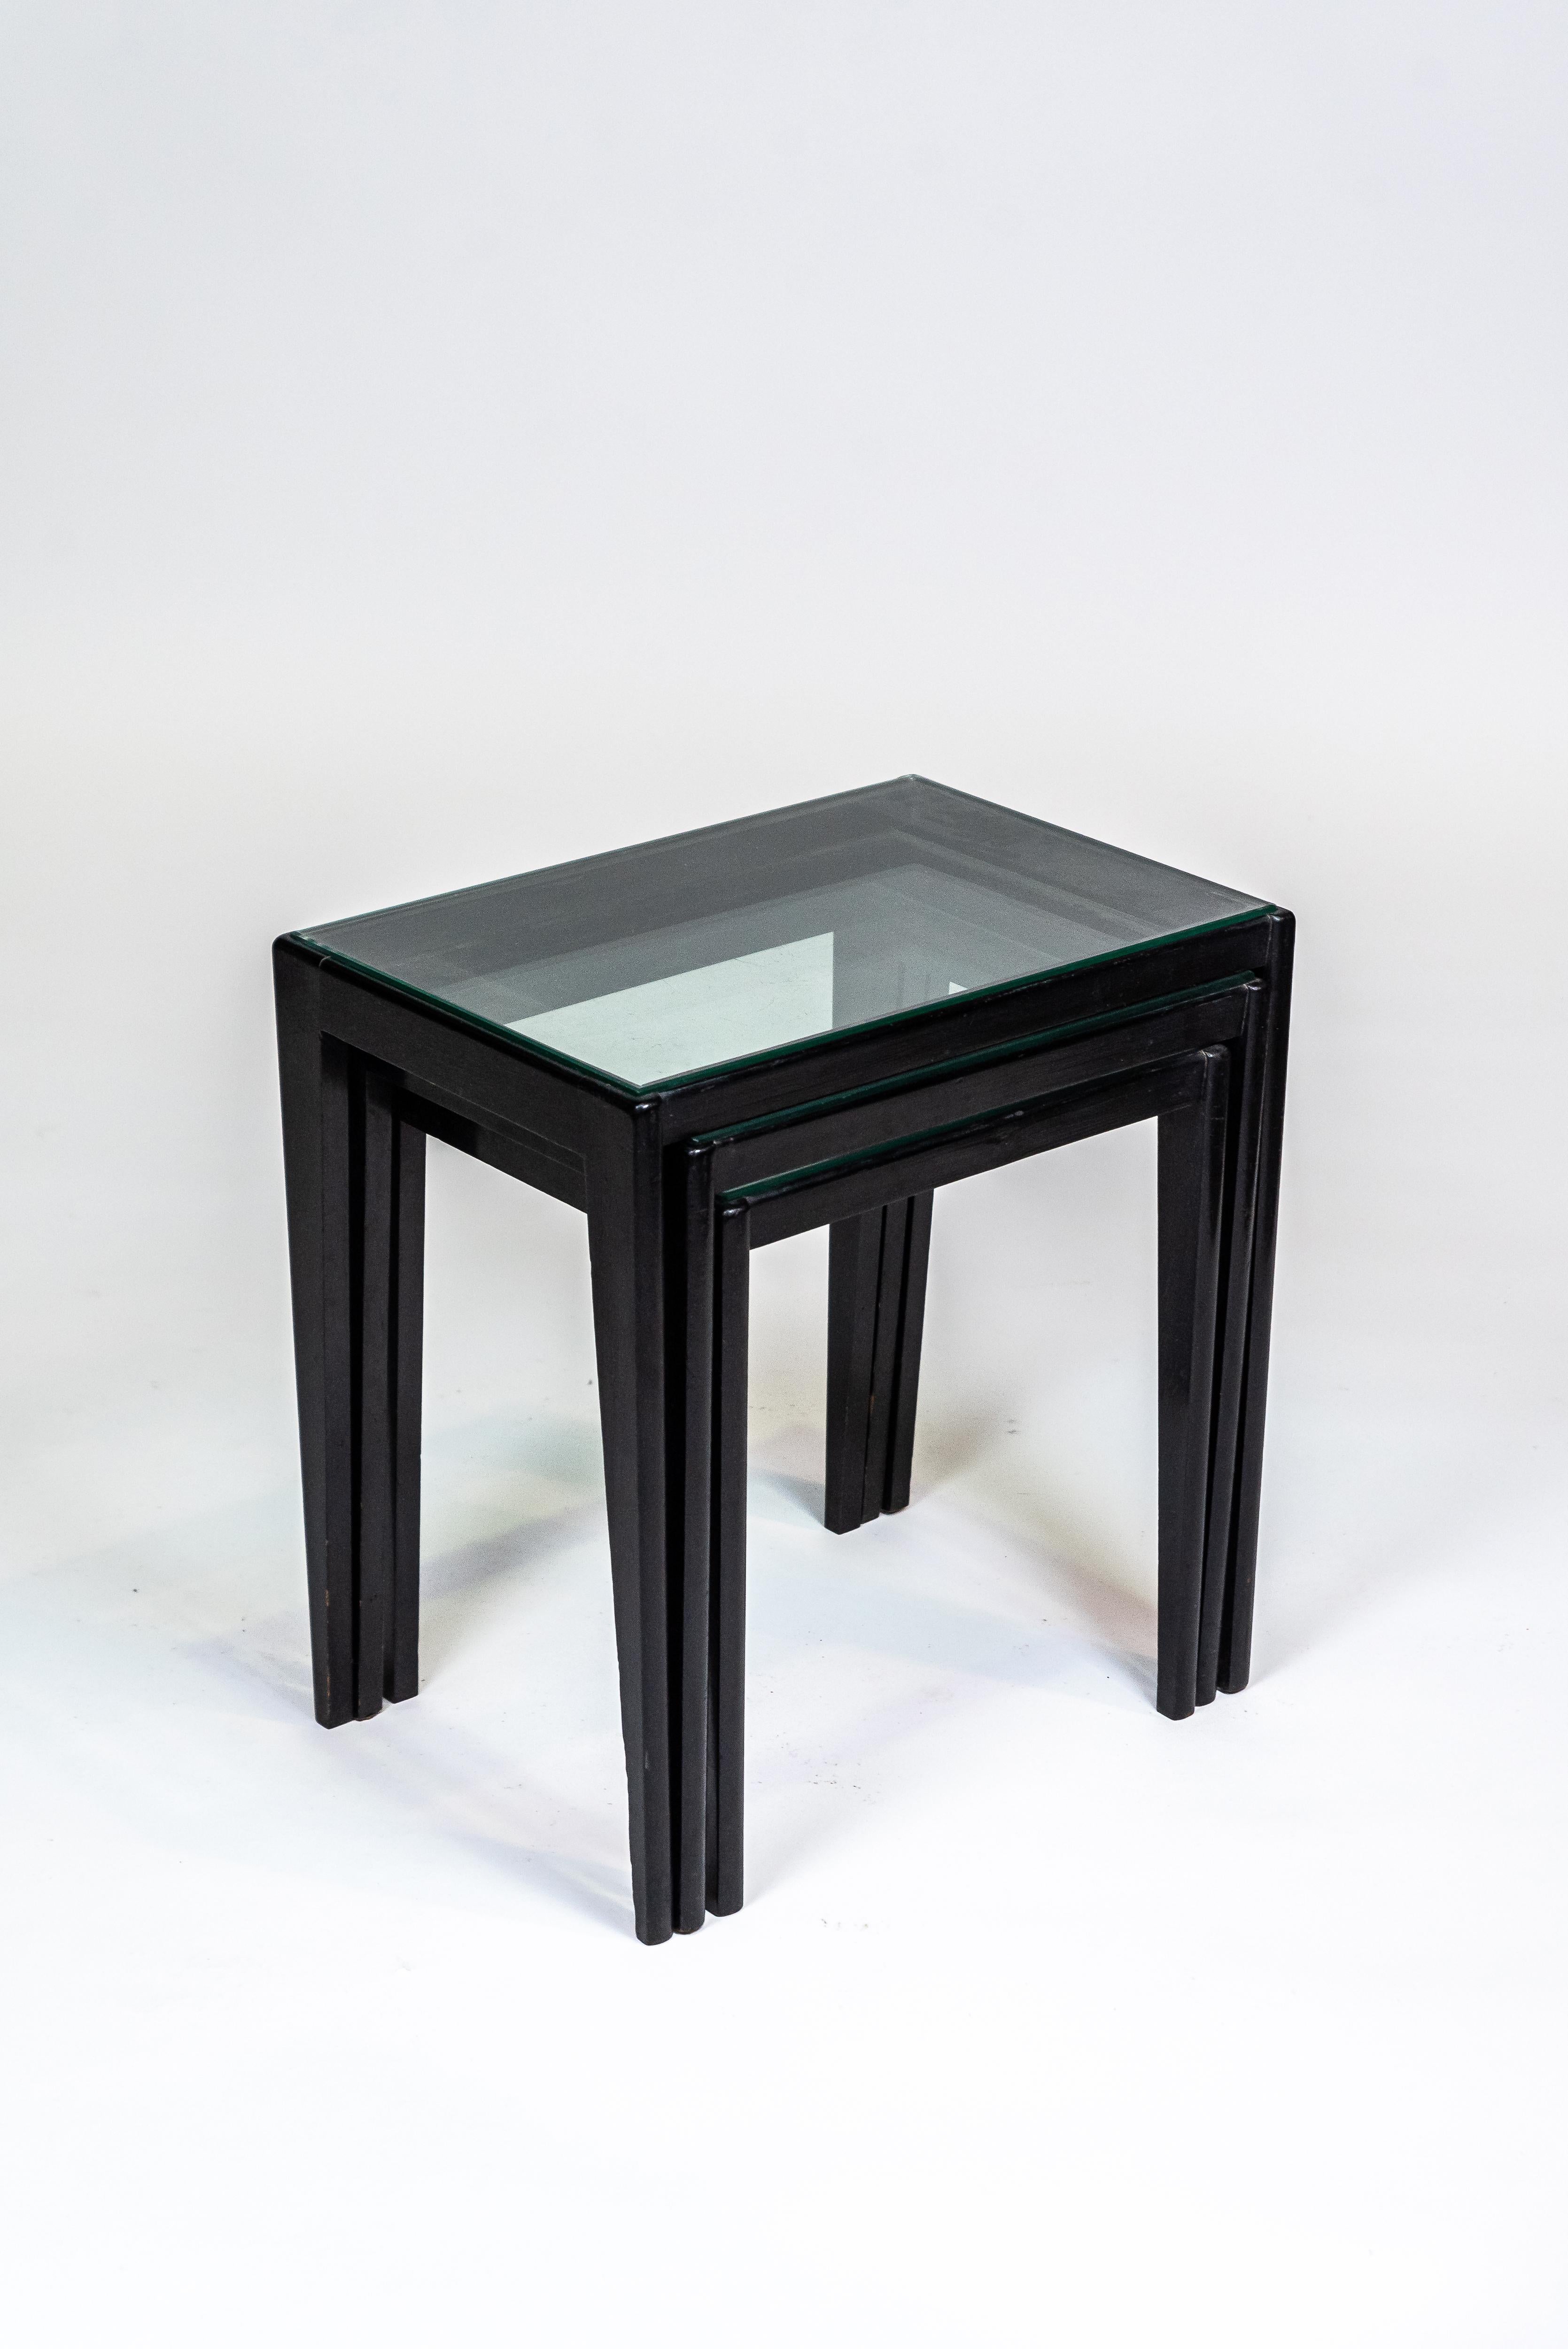 Giuseppe Scapinelli, Nesting Tables, 1960 For Sale 1